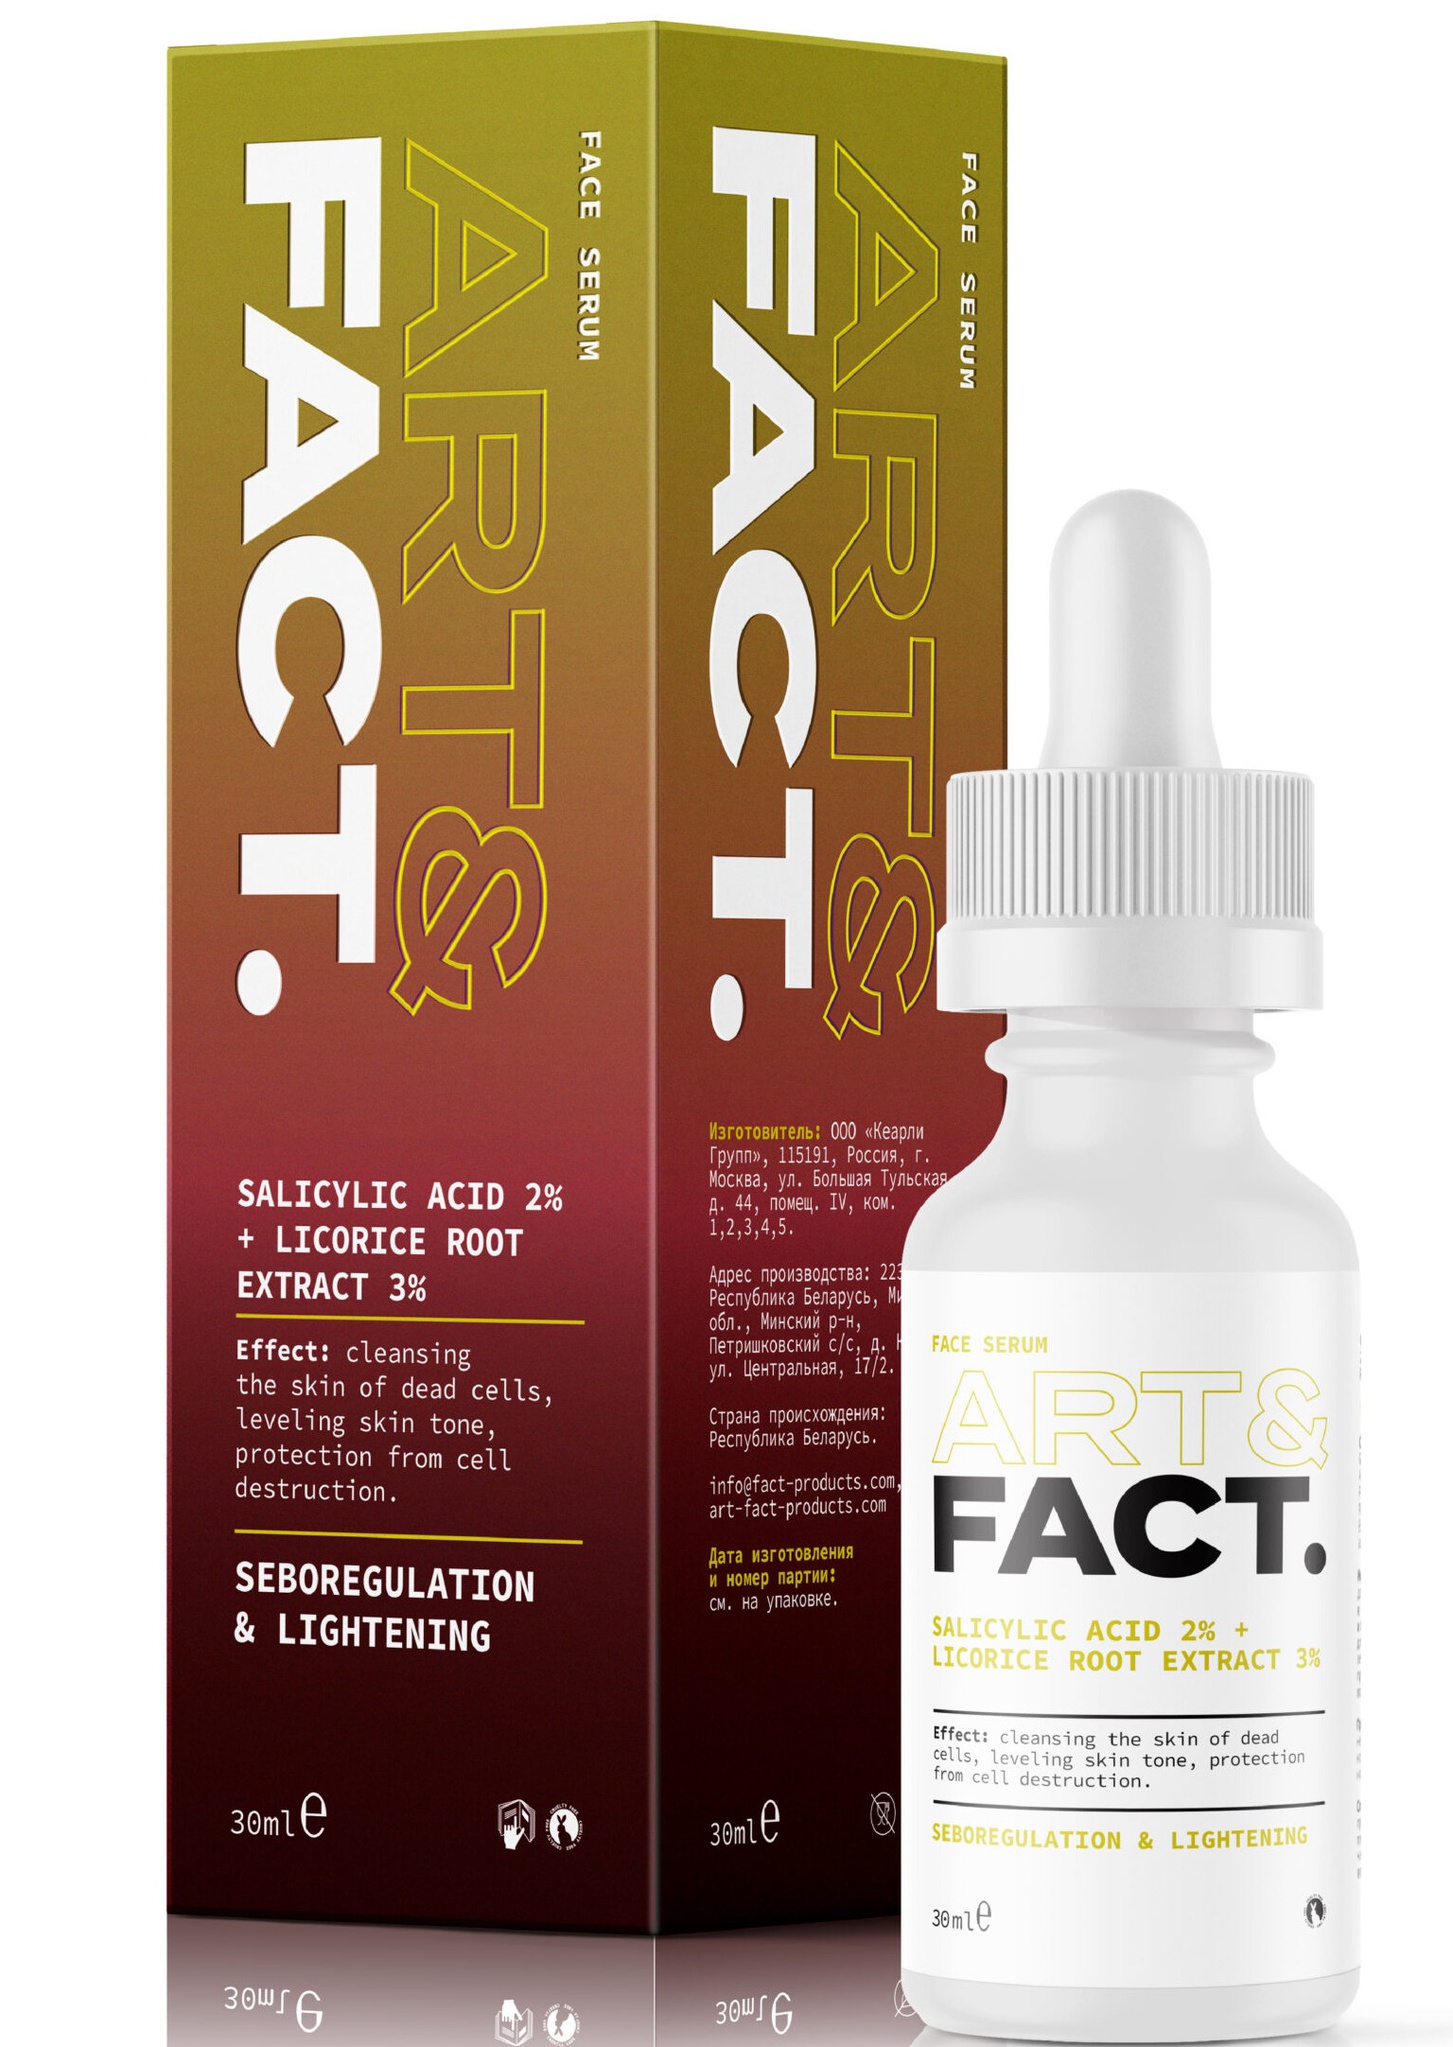 ART&FACT. Face Serum With Salycilic Acid 2% And Licorice Root Extract 3%